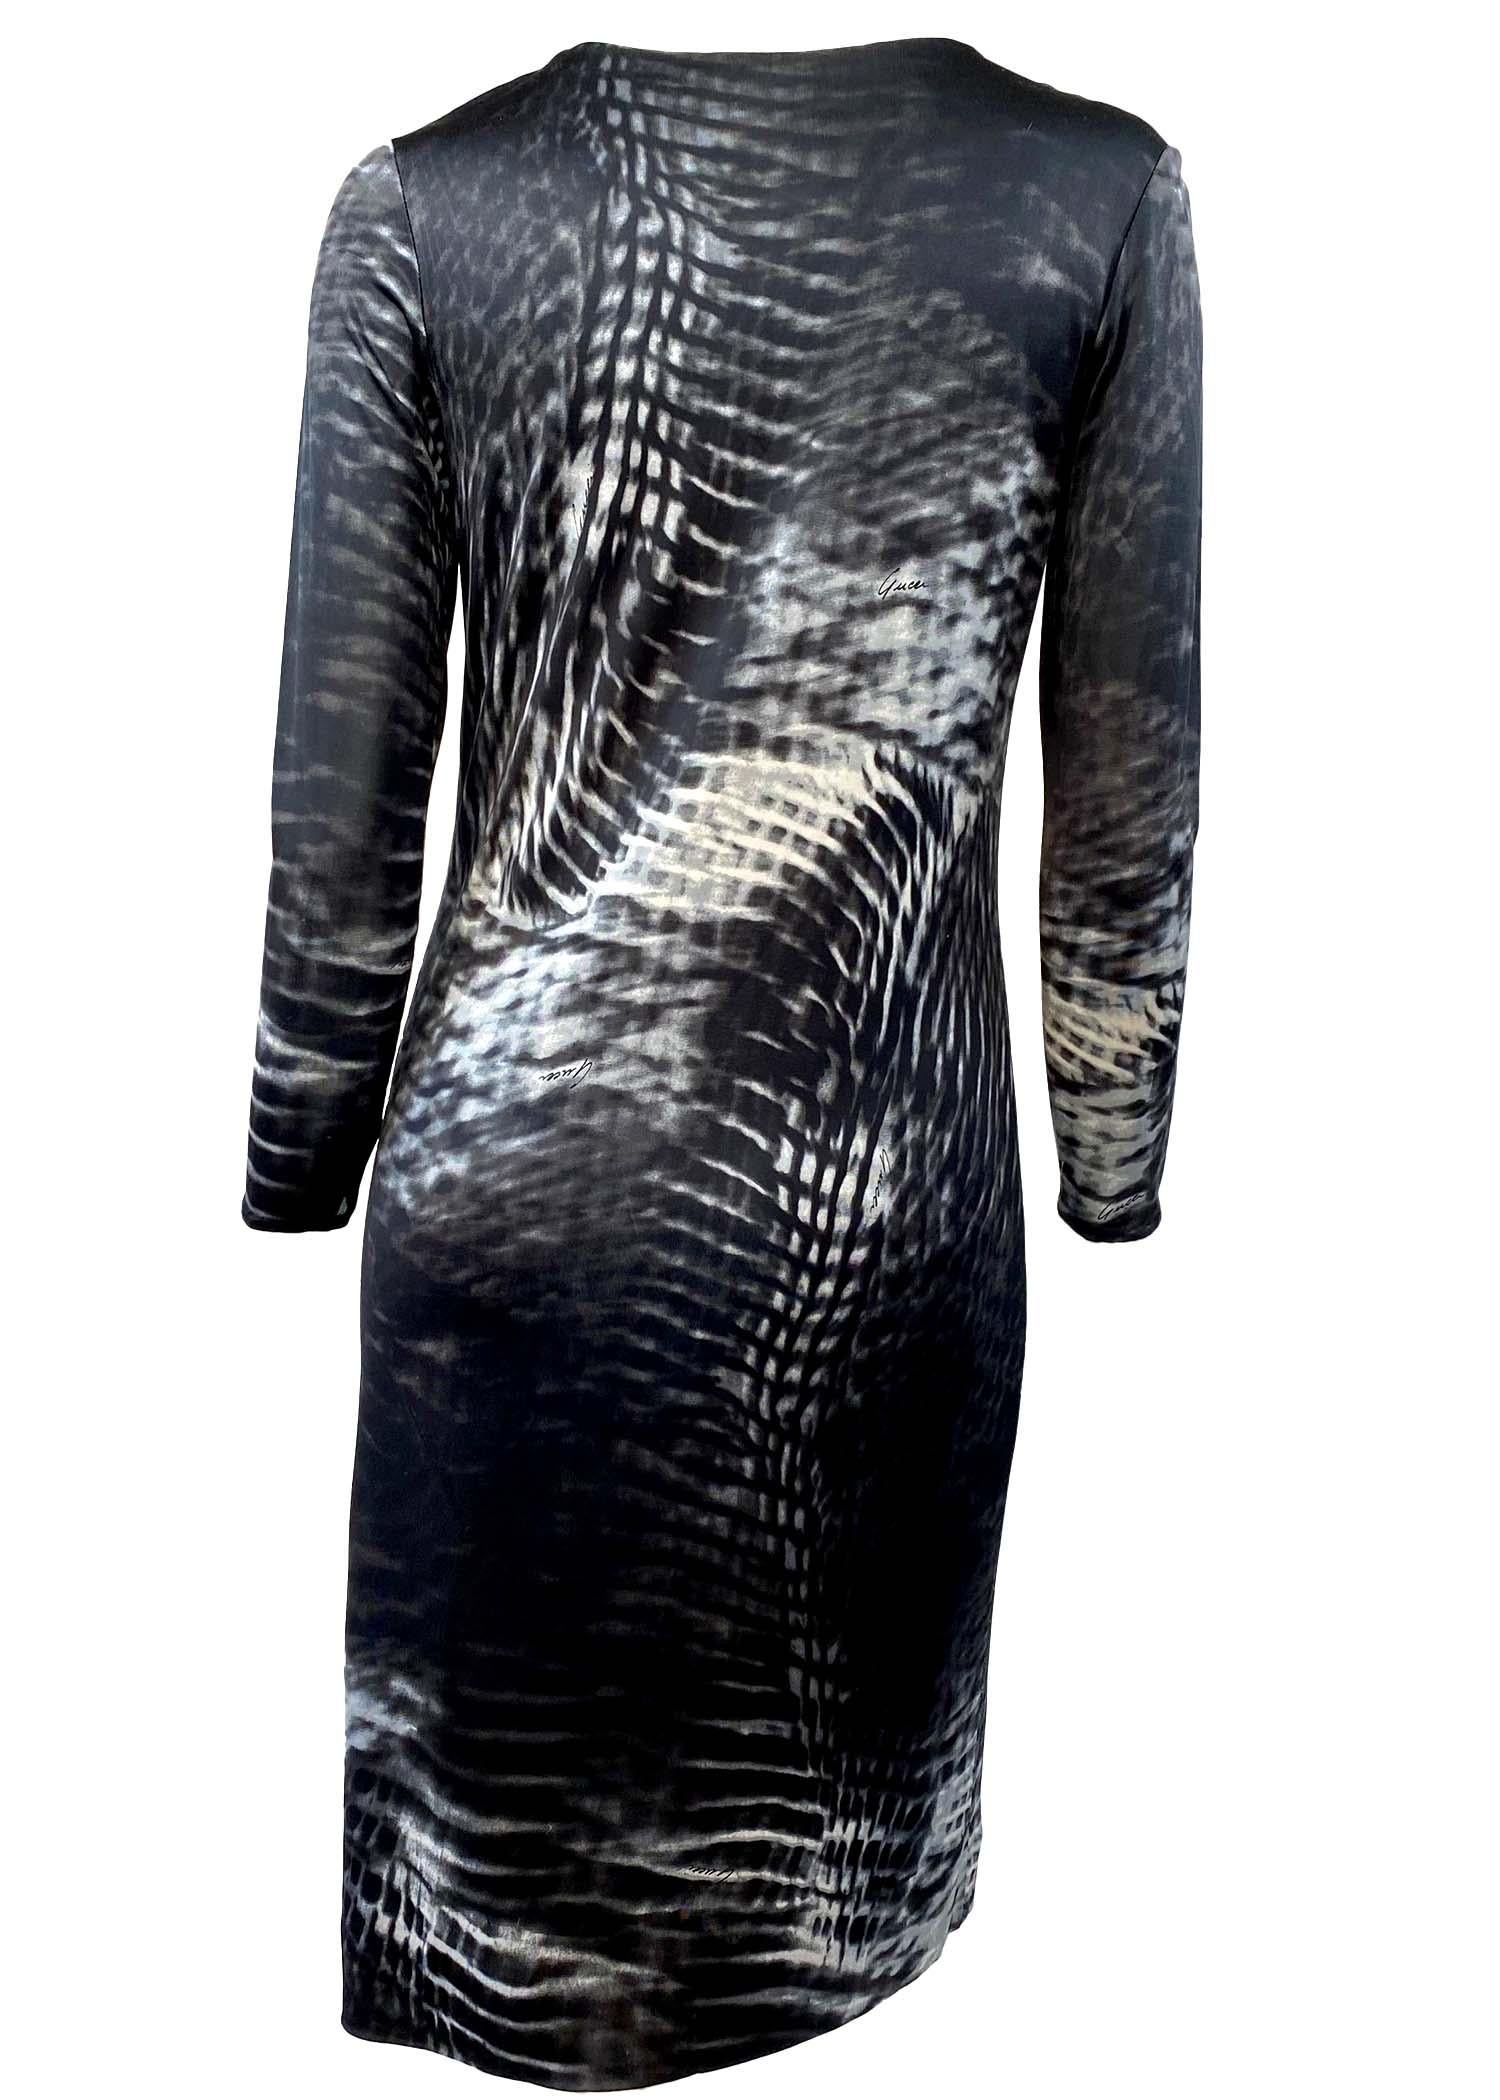 S/S 2000 Gucci by Tom Ford Abstract Print Viscose V-Neck Dress In Good Condition For Sale In West Hollywood, CA